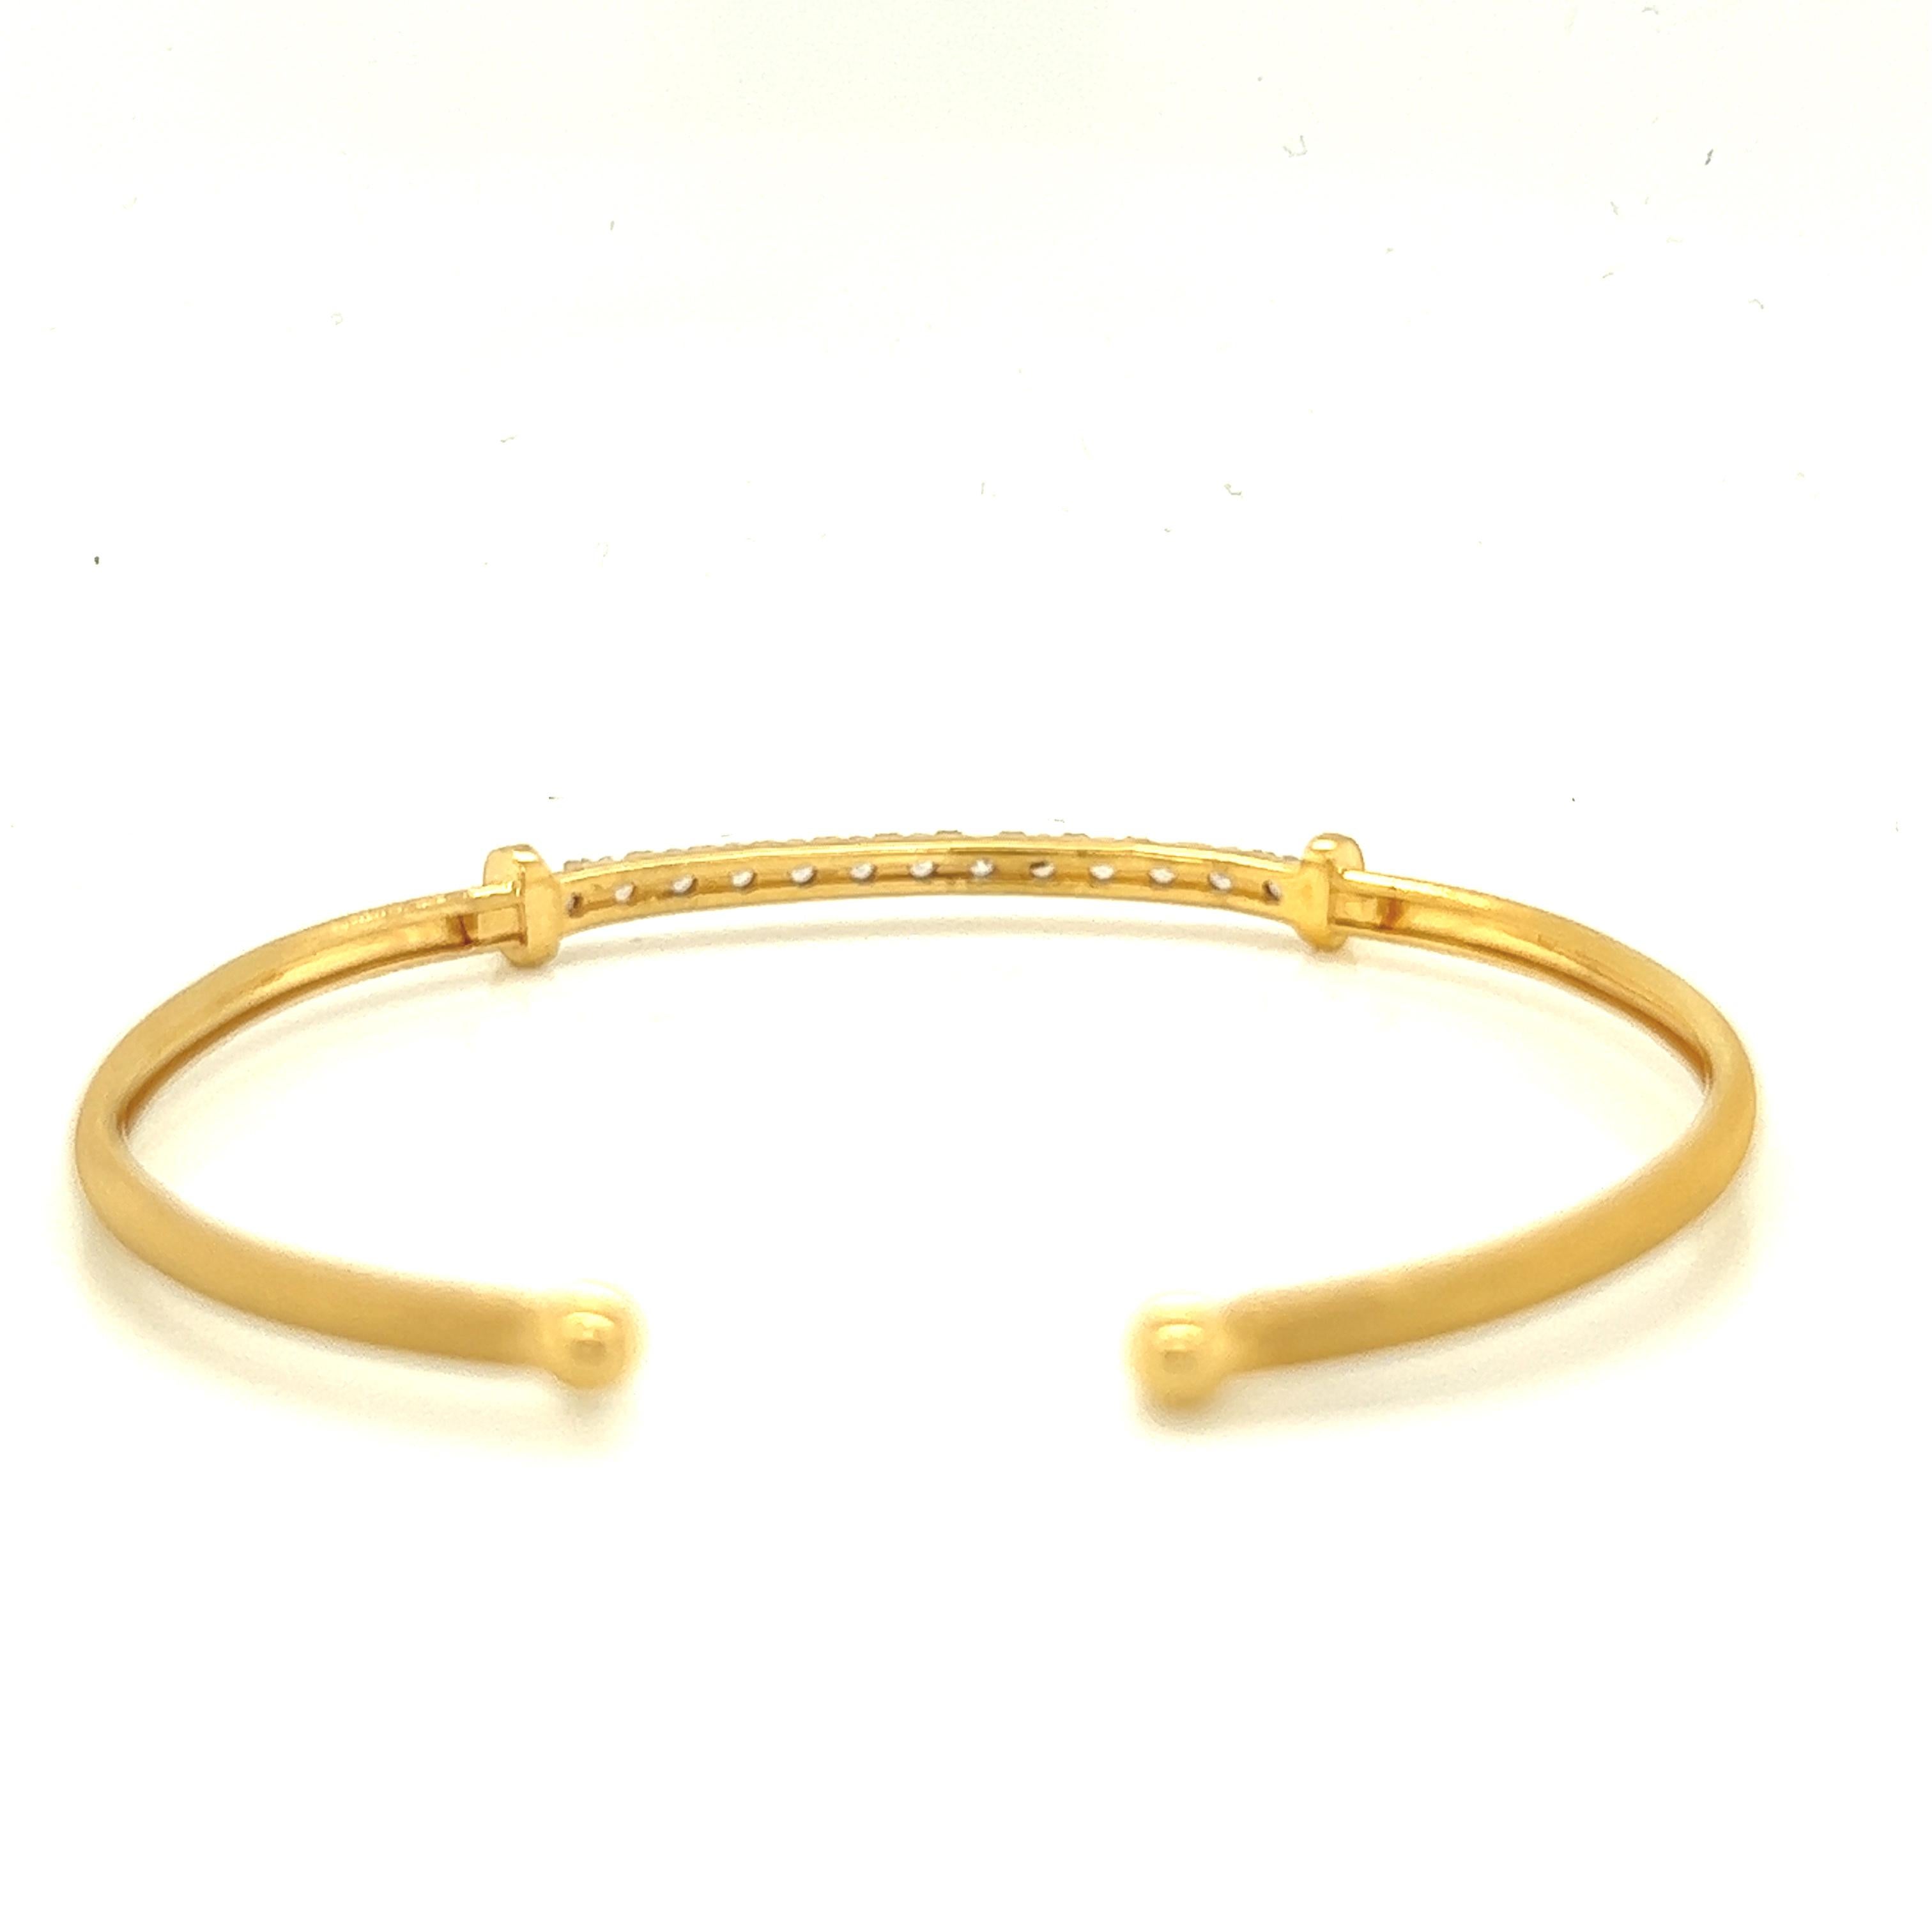 Round Cut Hand-Crafted 14K Yellow Gold Flexible Bangle Bracelet. For Sale